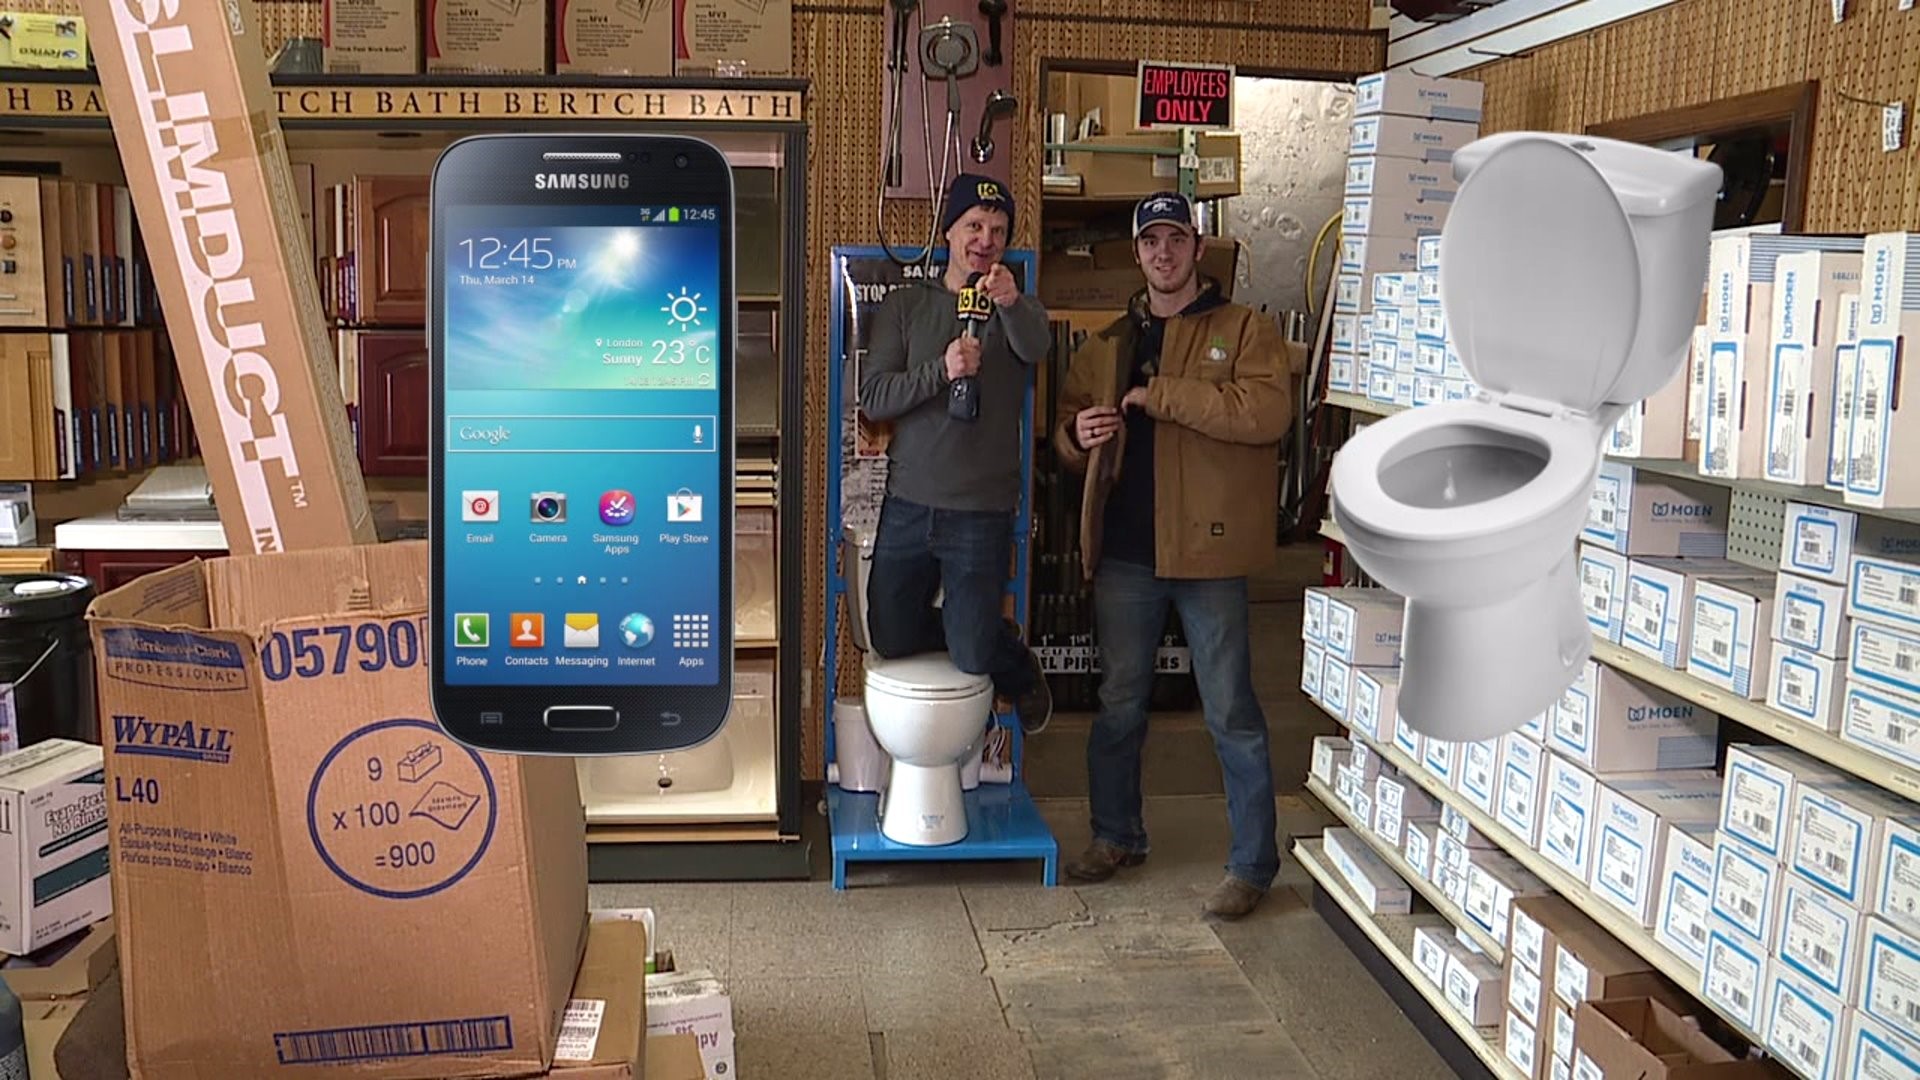 Wham Cam: More Toilets or Cell Phone Users on Earth?